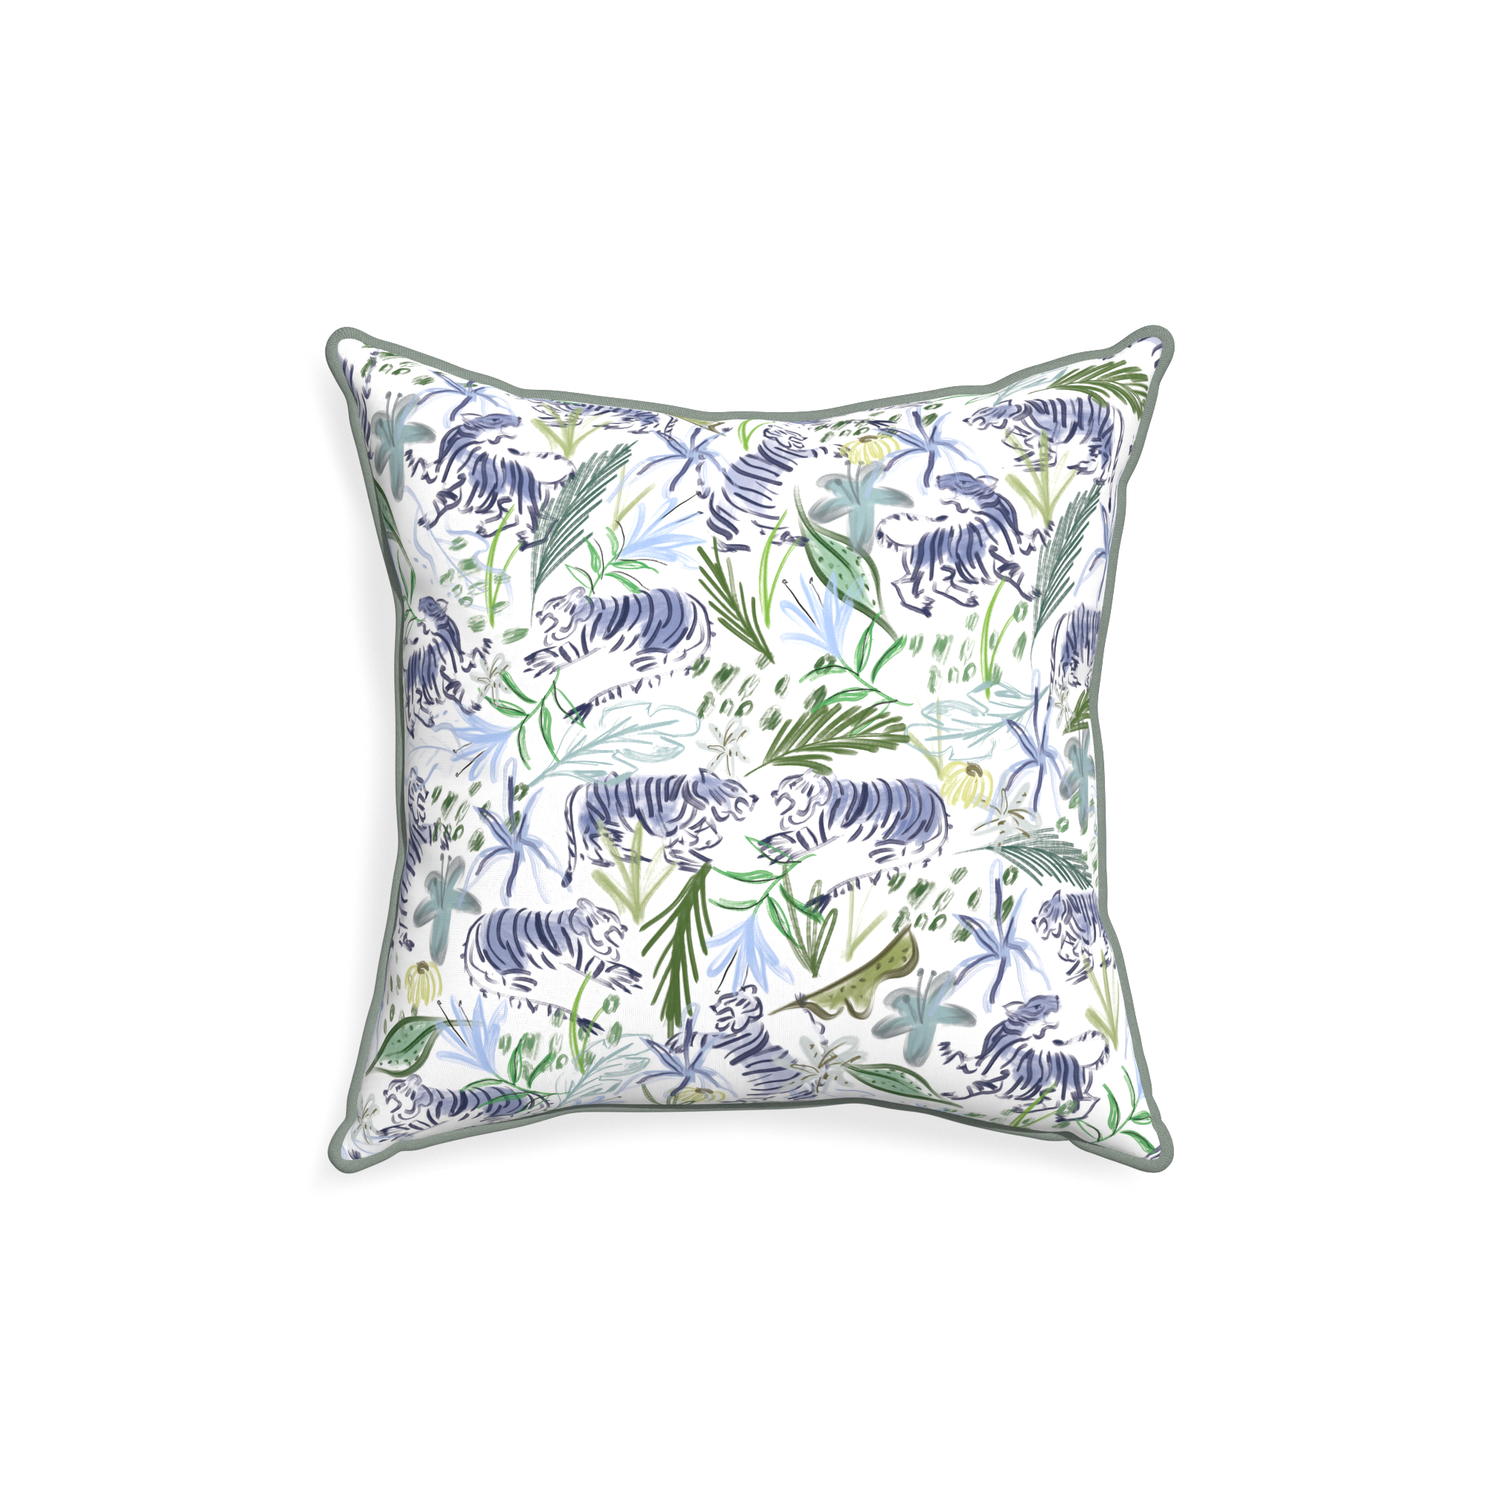 18-square frida green custom green tigerpillow with sage piping on white background